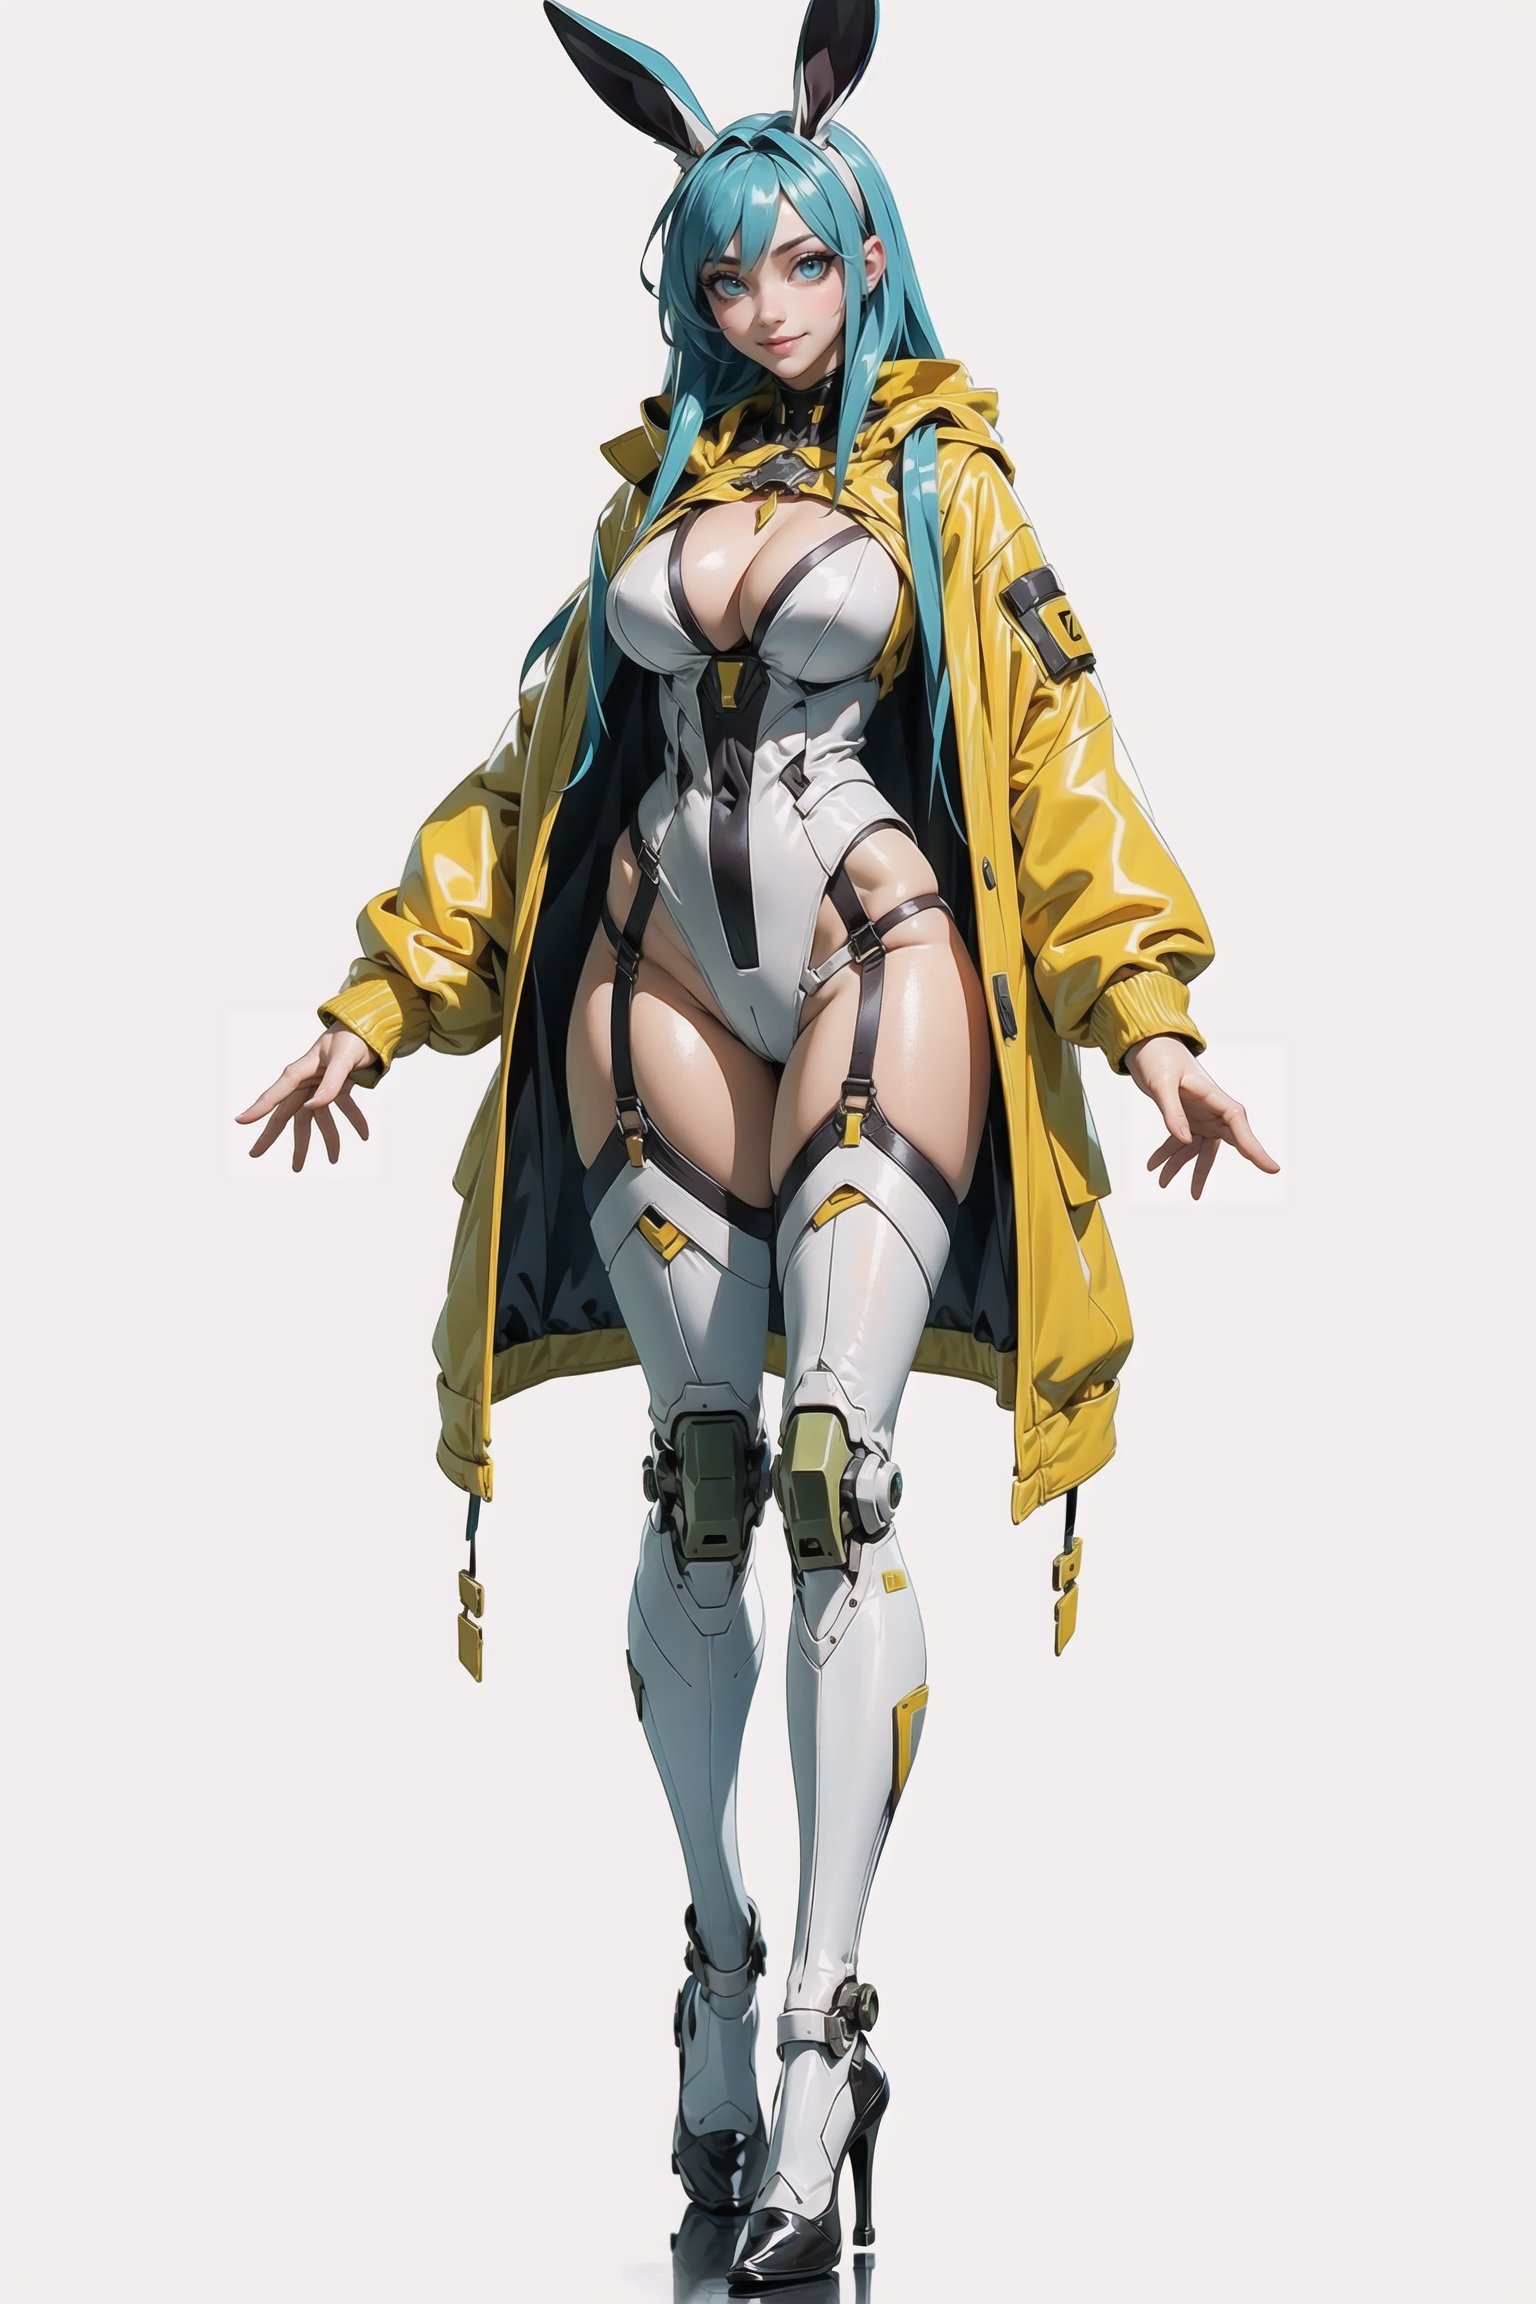 ((masterpiece, best quality)), 1_girl_posing, seduction face, sexy smile, naked_breast, 30 years old, naked_big_boobs, open_legs, bunny girl suit, Rabbit_ear, wearing_yellow_jacket, seductive_smile, green_eyes, Blue_hair, Large_Blue_hair, Mecha_high_heels, high_heels, Best_quality_anatomy,  Good_anatomy_legs,  best_quality_hands, non_muscular_body, White_background, Light_ reflects, clear blue hair, Long hair, yellow jacket, garter belt, ,Science Fiction, boob_window, cleavage, White_suit,  open_legs, full_body, White_suit, short_yellow_jacket, solo_female,
,3DMM